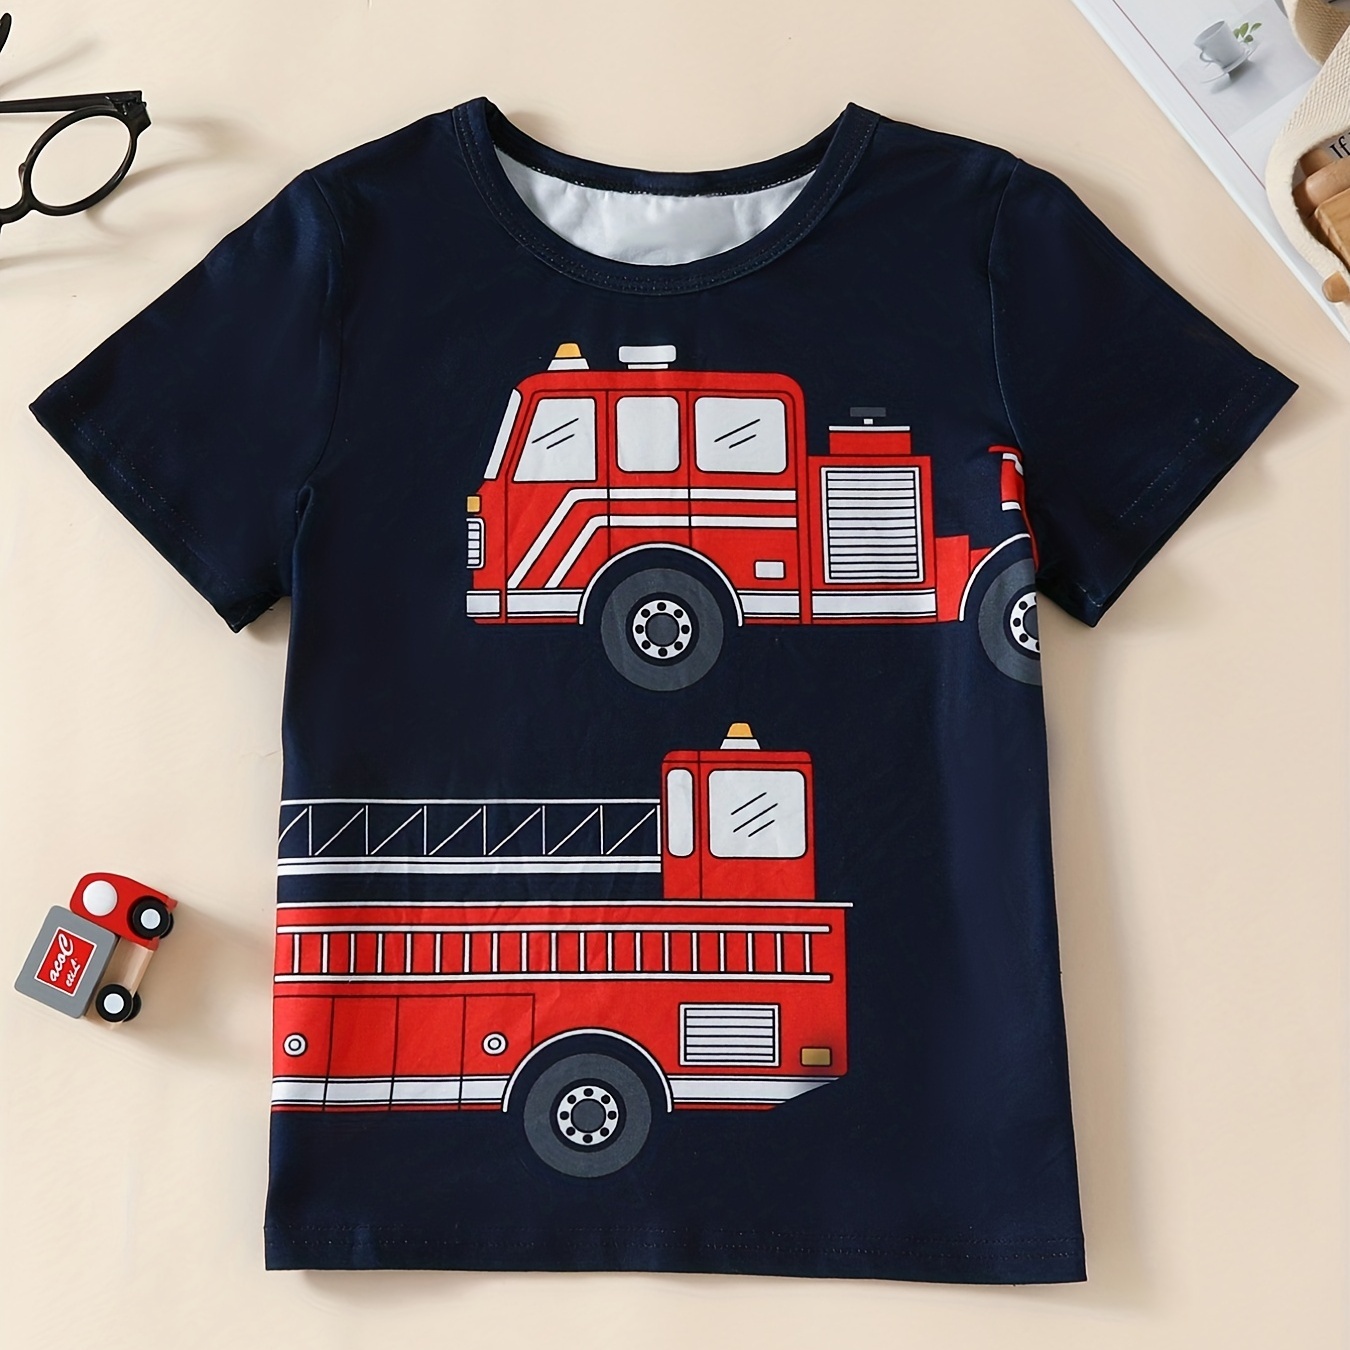 

Cartoon Fire Truck Print T Shirt, Tees For Kids Boys, Casual Short Sleeve T-shirt For Summer Spring Fall, Tops As Gifts